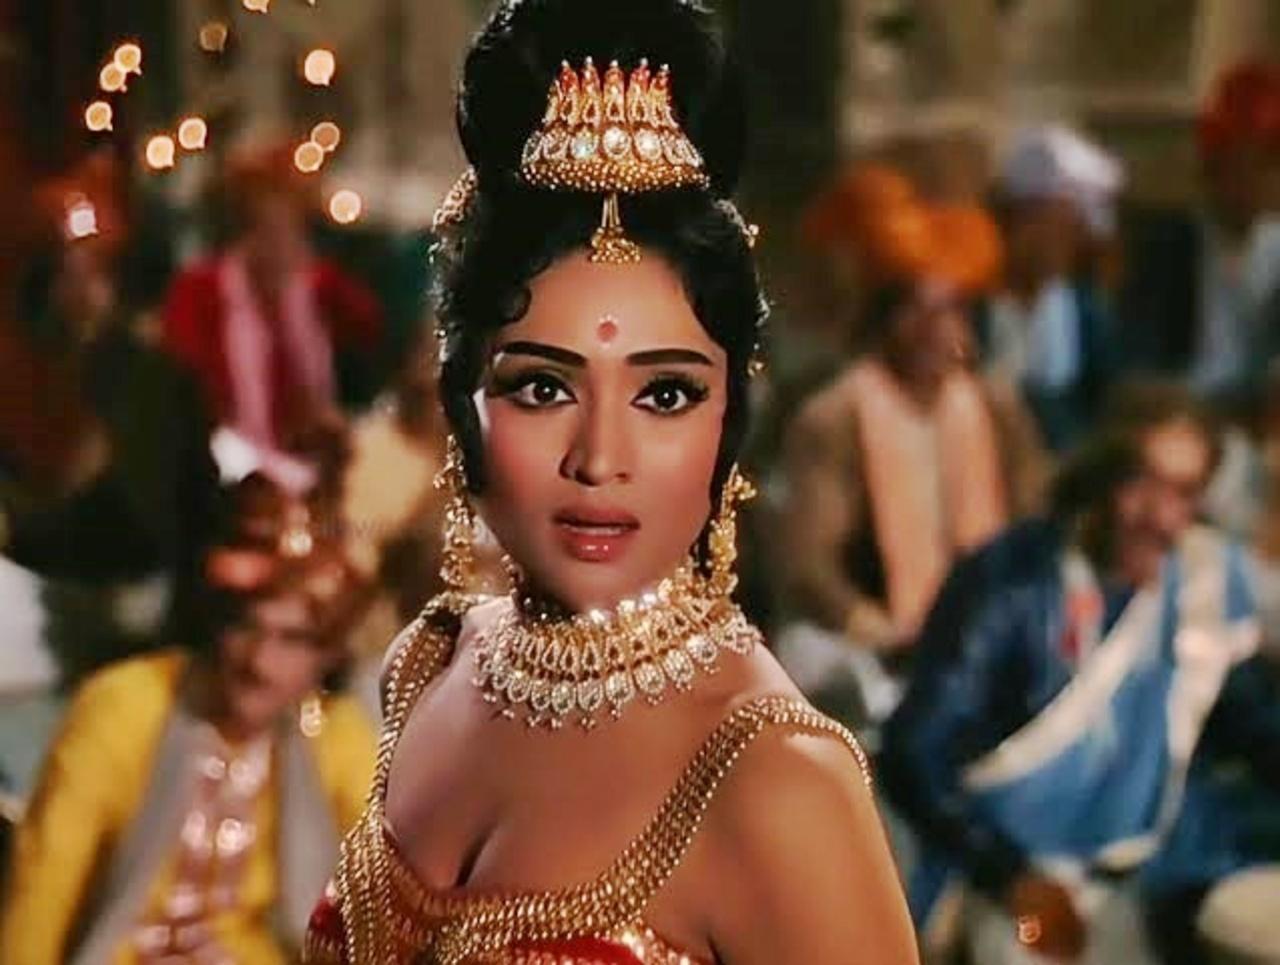 The 1966 film Amrapali saw dance legend Vyjayanthimala play the role of a courtesan during the Magadha empire. 